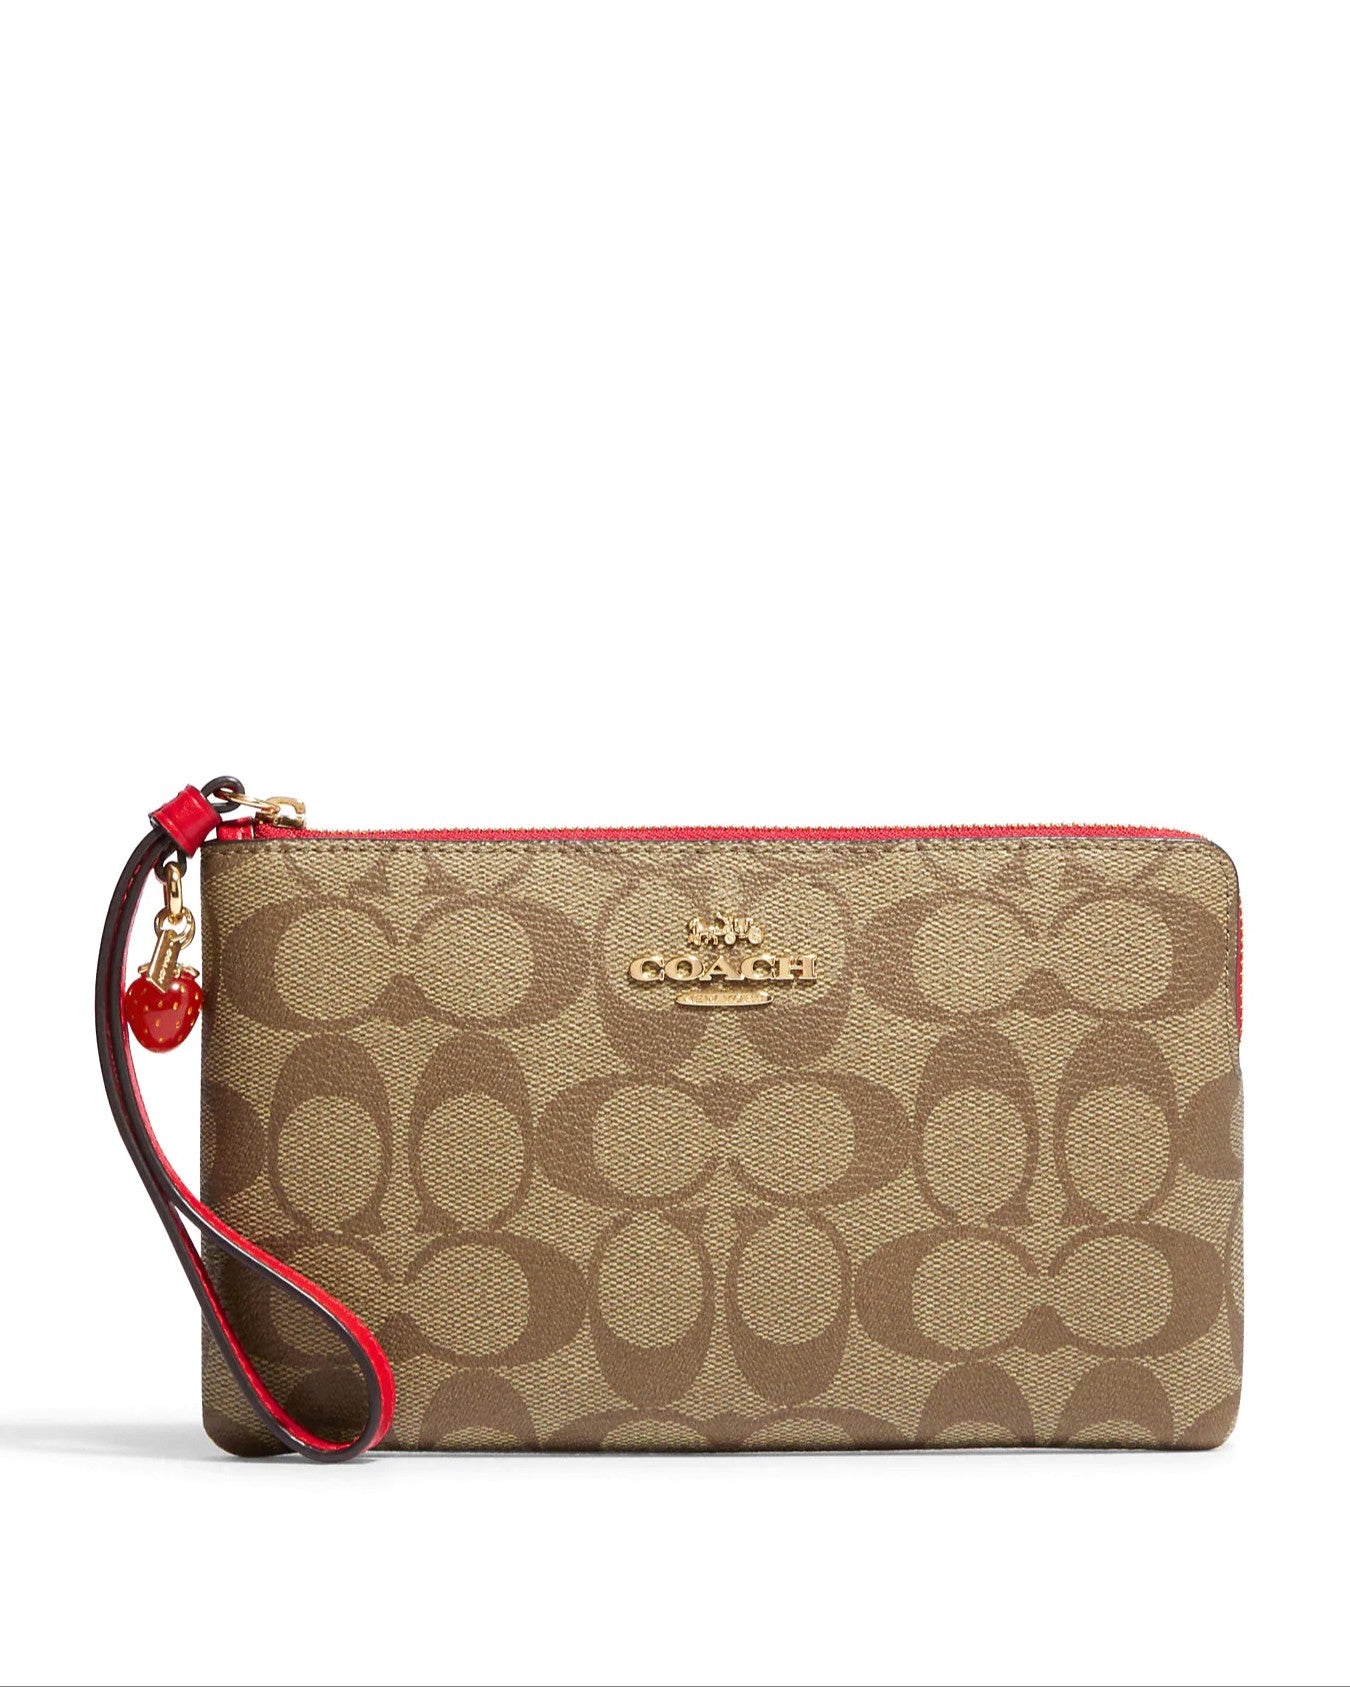 title:Coach Women's Khaki & Electric Red Large Corner Zip Wristlet In Signature Canvas With Strawberry;color:Khaki / Electric Red